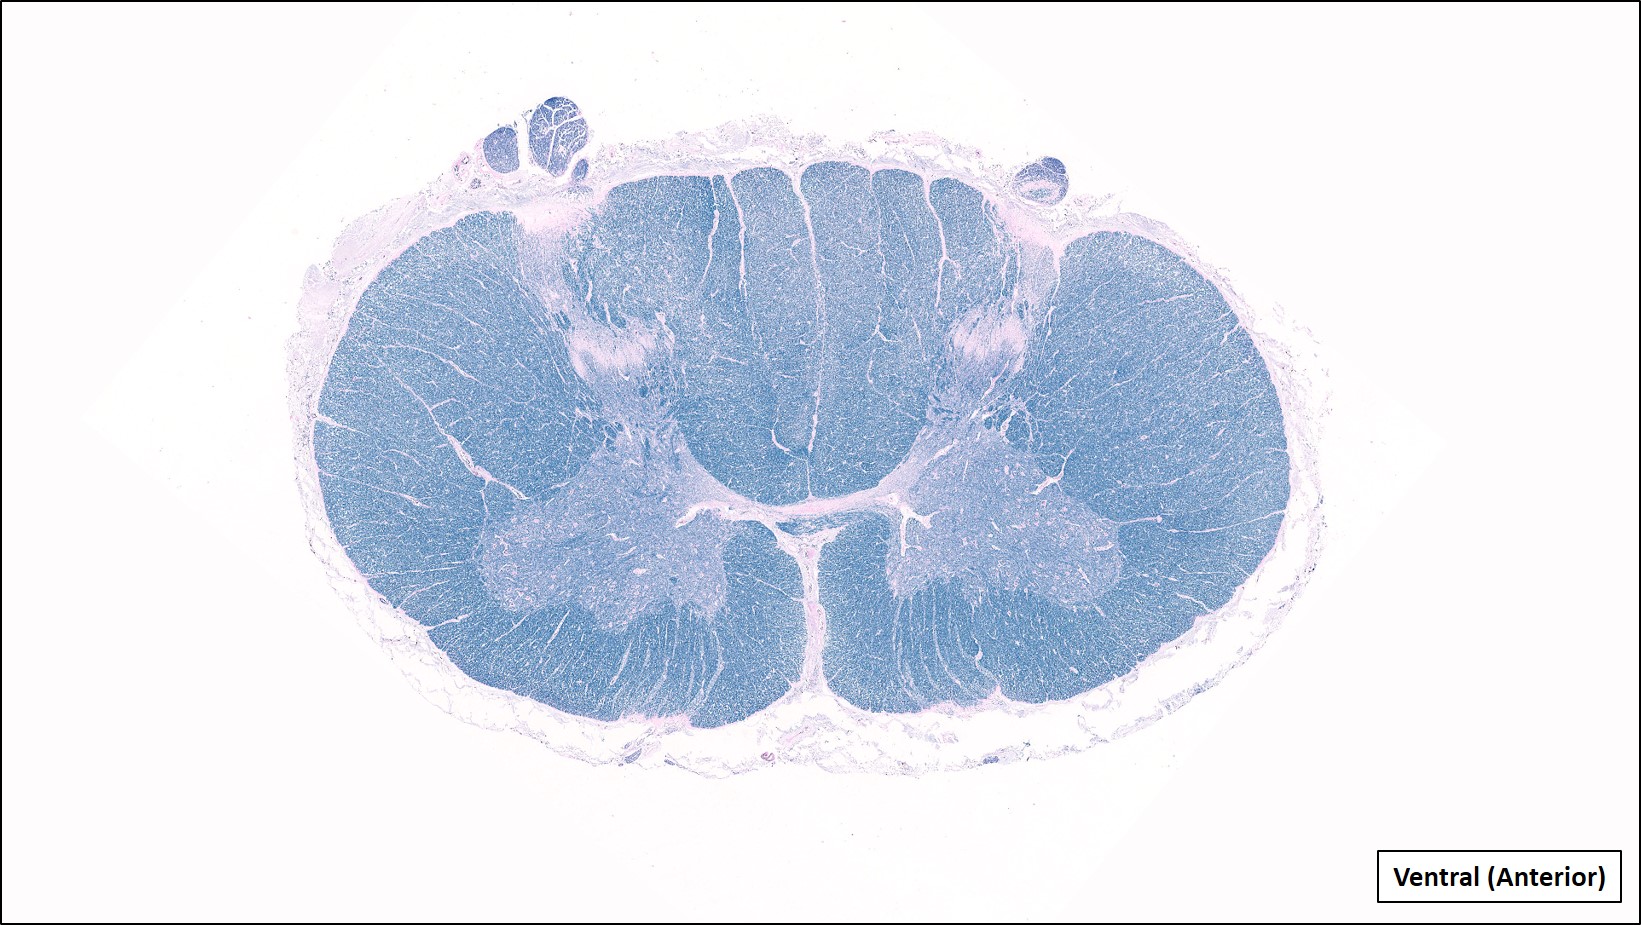 2. Spinal cord – Cervical enlargement (Very low power, Luxol fast blue [LFB] stain)